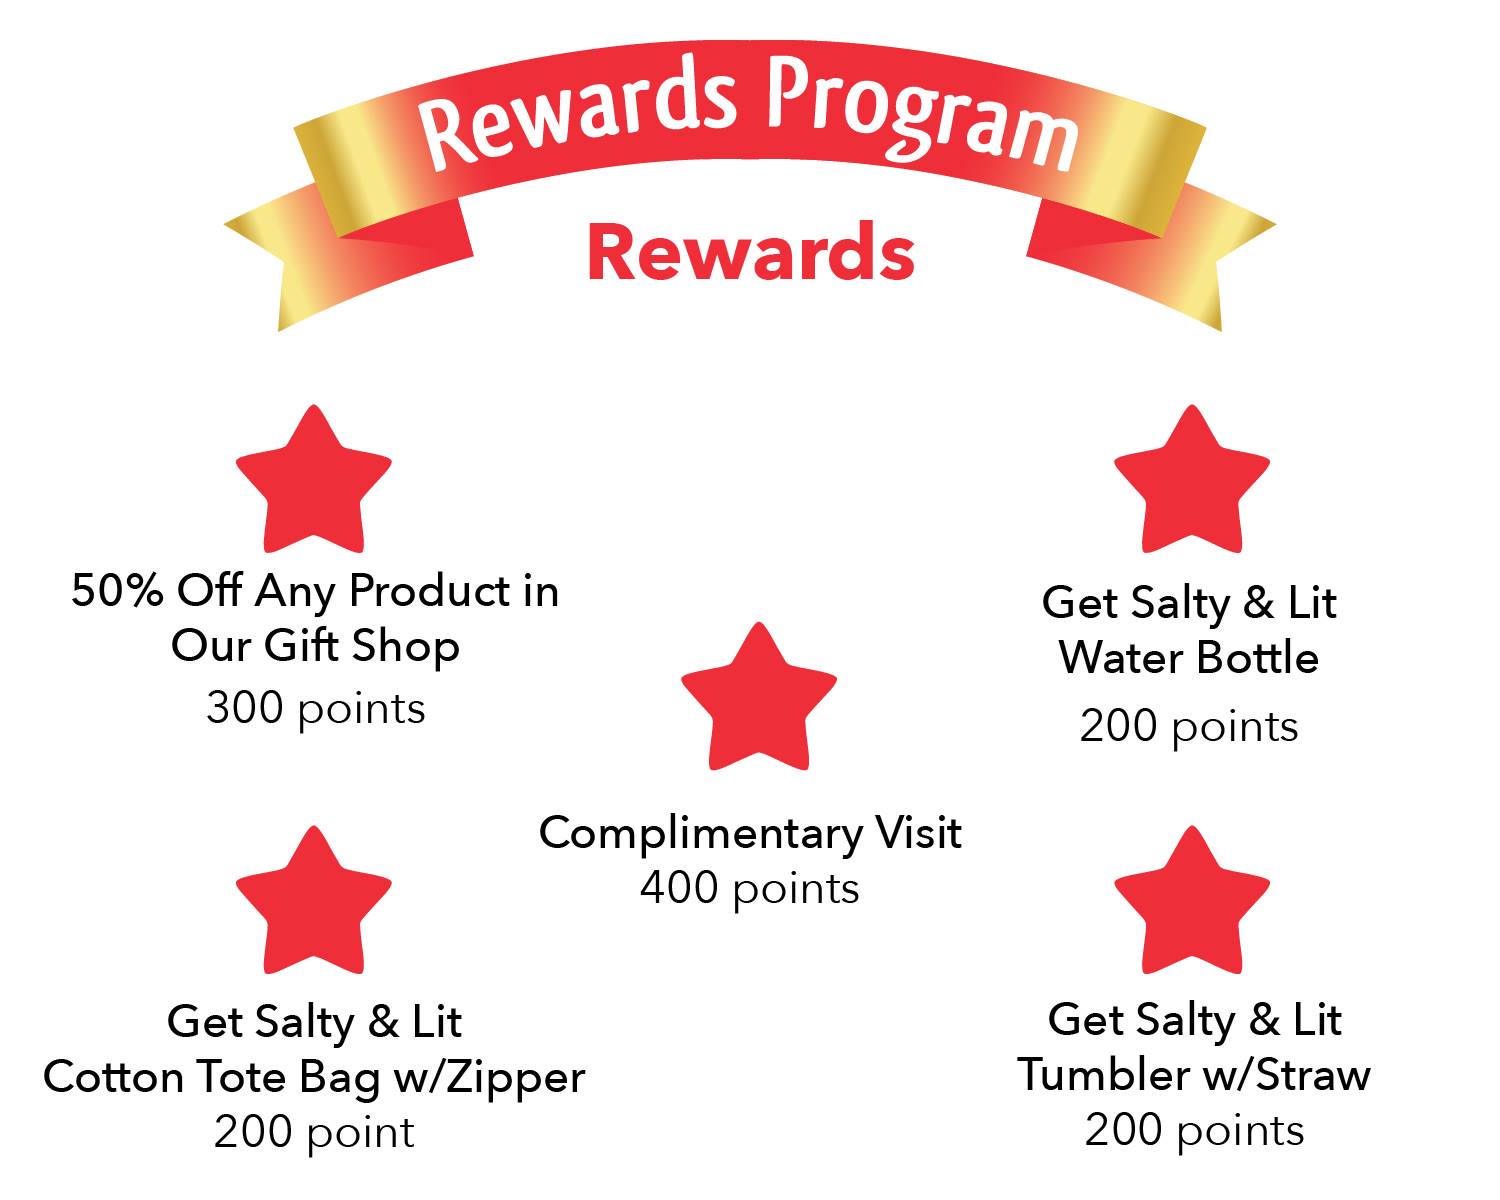 Redeem rewards points for valuable services and products. Start earning points t - Get Salty 